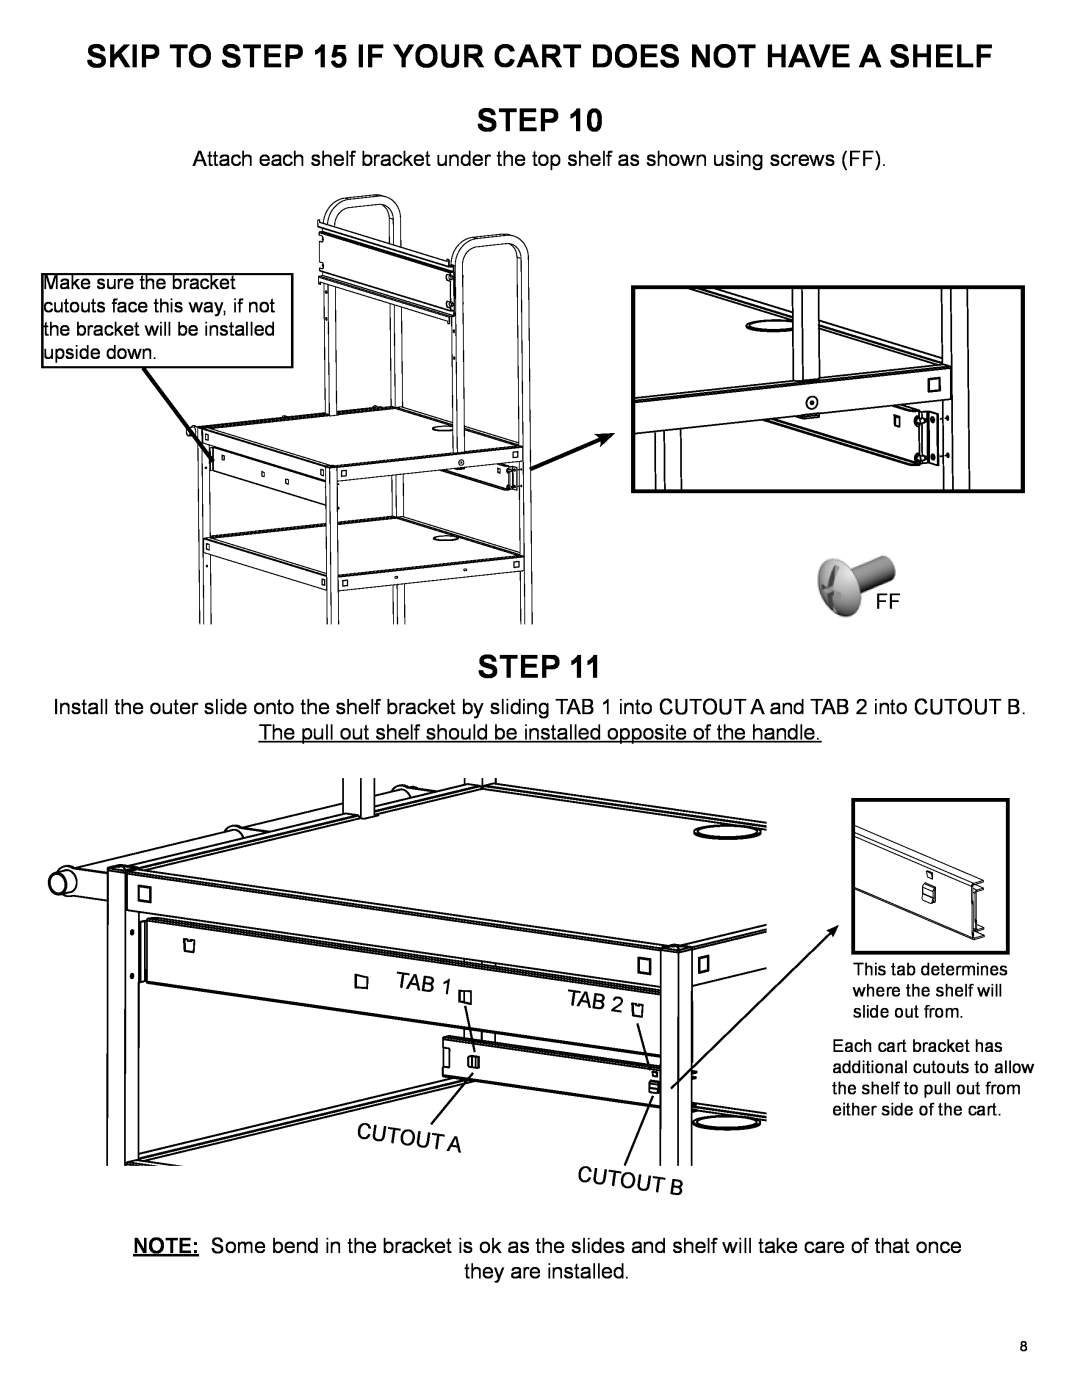 Bretford FP42ULC manual Skip To If Your Cart Does Not Have A Shelf Step, Cutout A Cutout B 